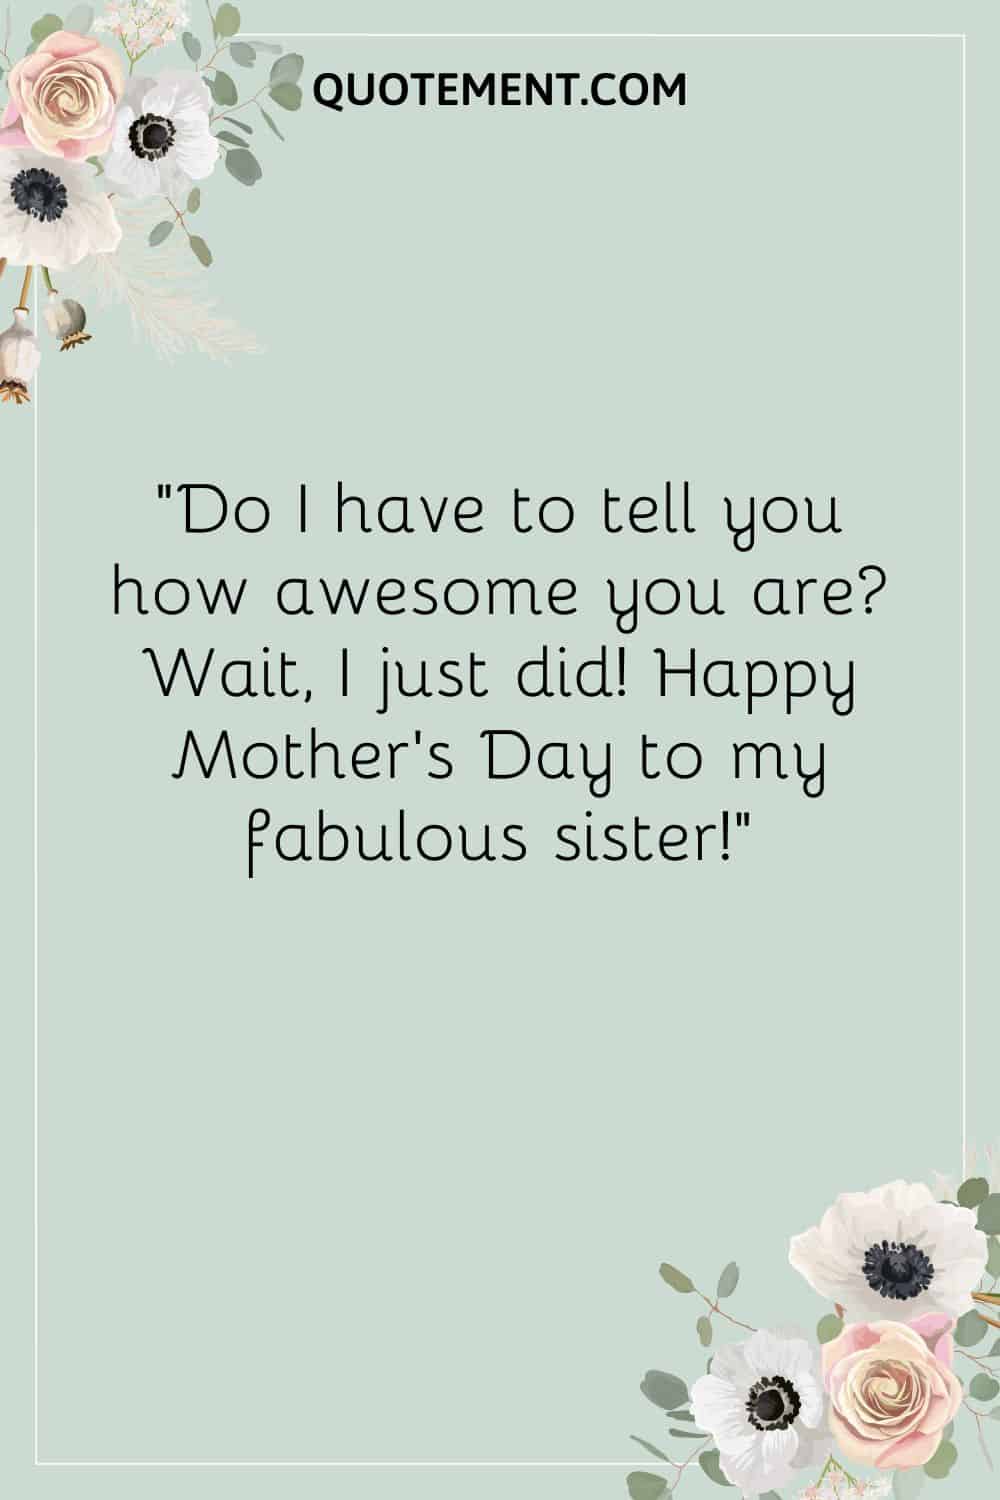 happy mother’s day for sister quote illustration
